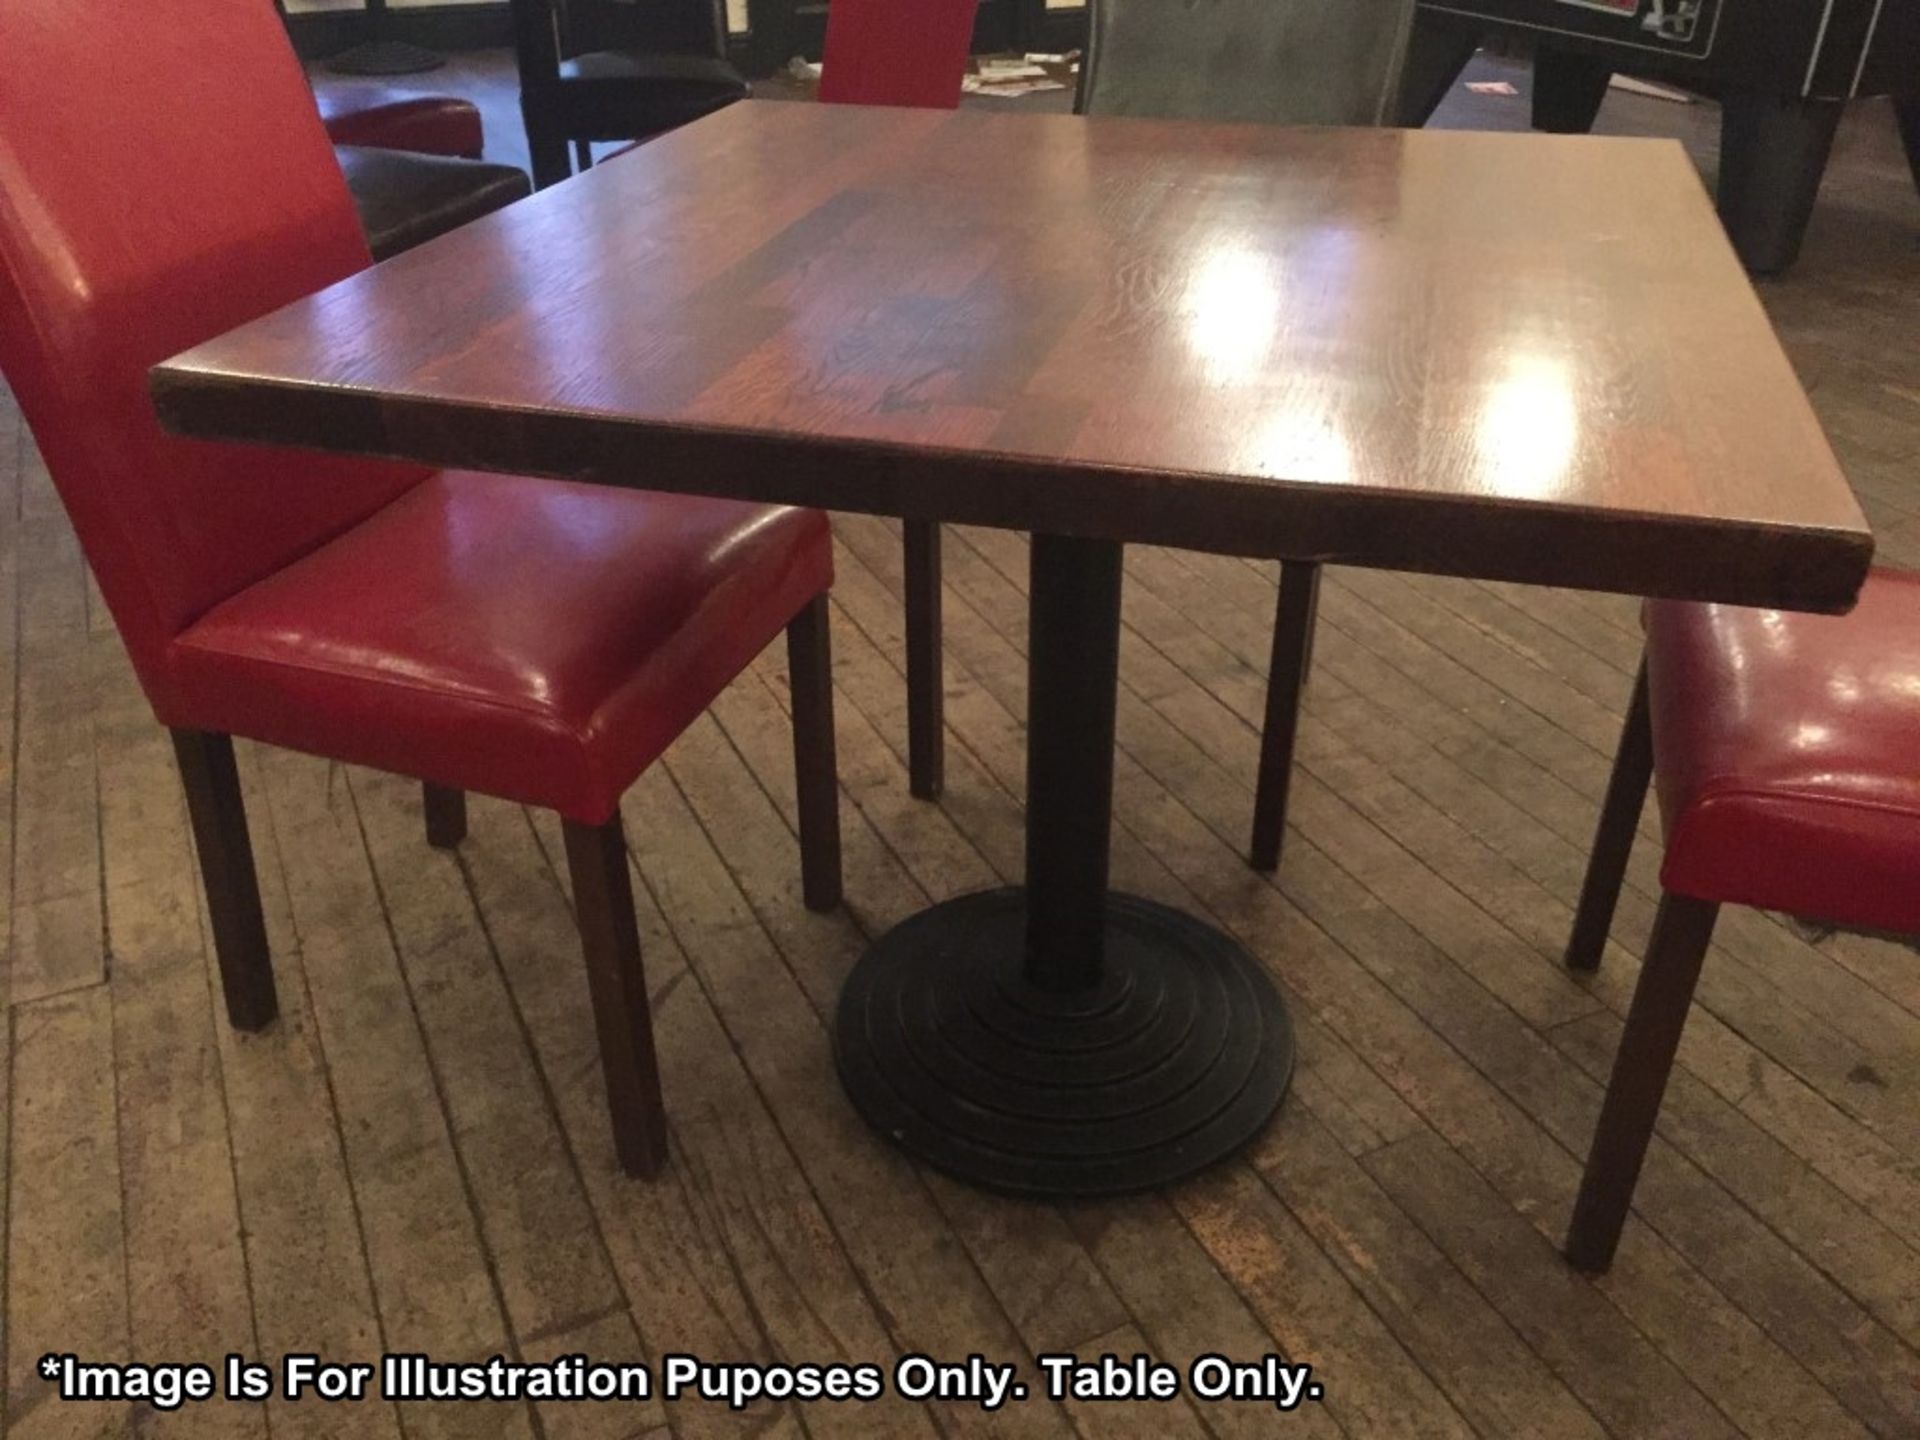 1 x Square Bistro Table - Solid Wood Table Top With Cast Iron Base - Dimensions: 90 X 90 cm, Height - Image 5 of 5